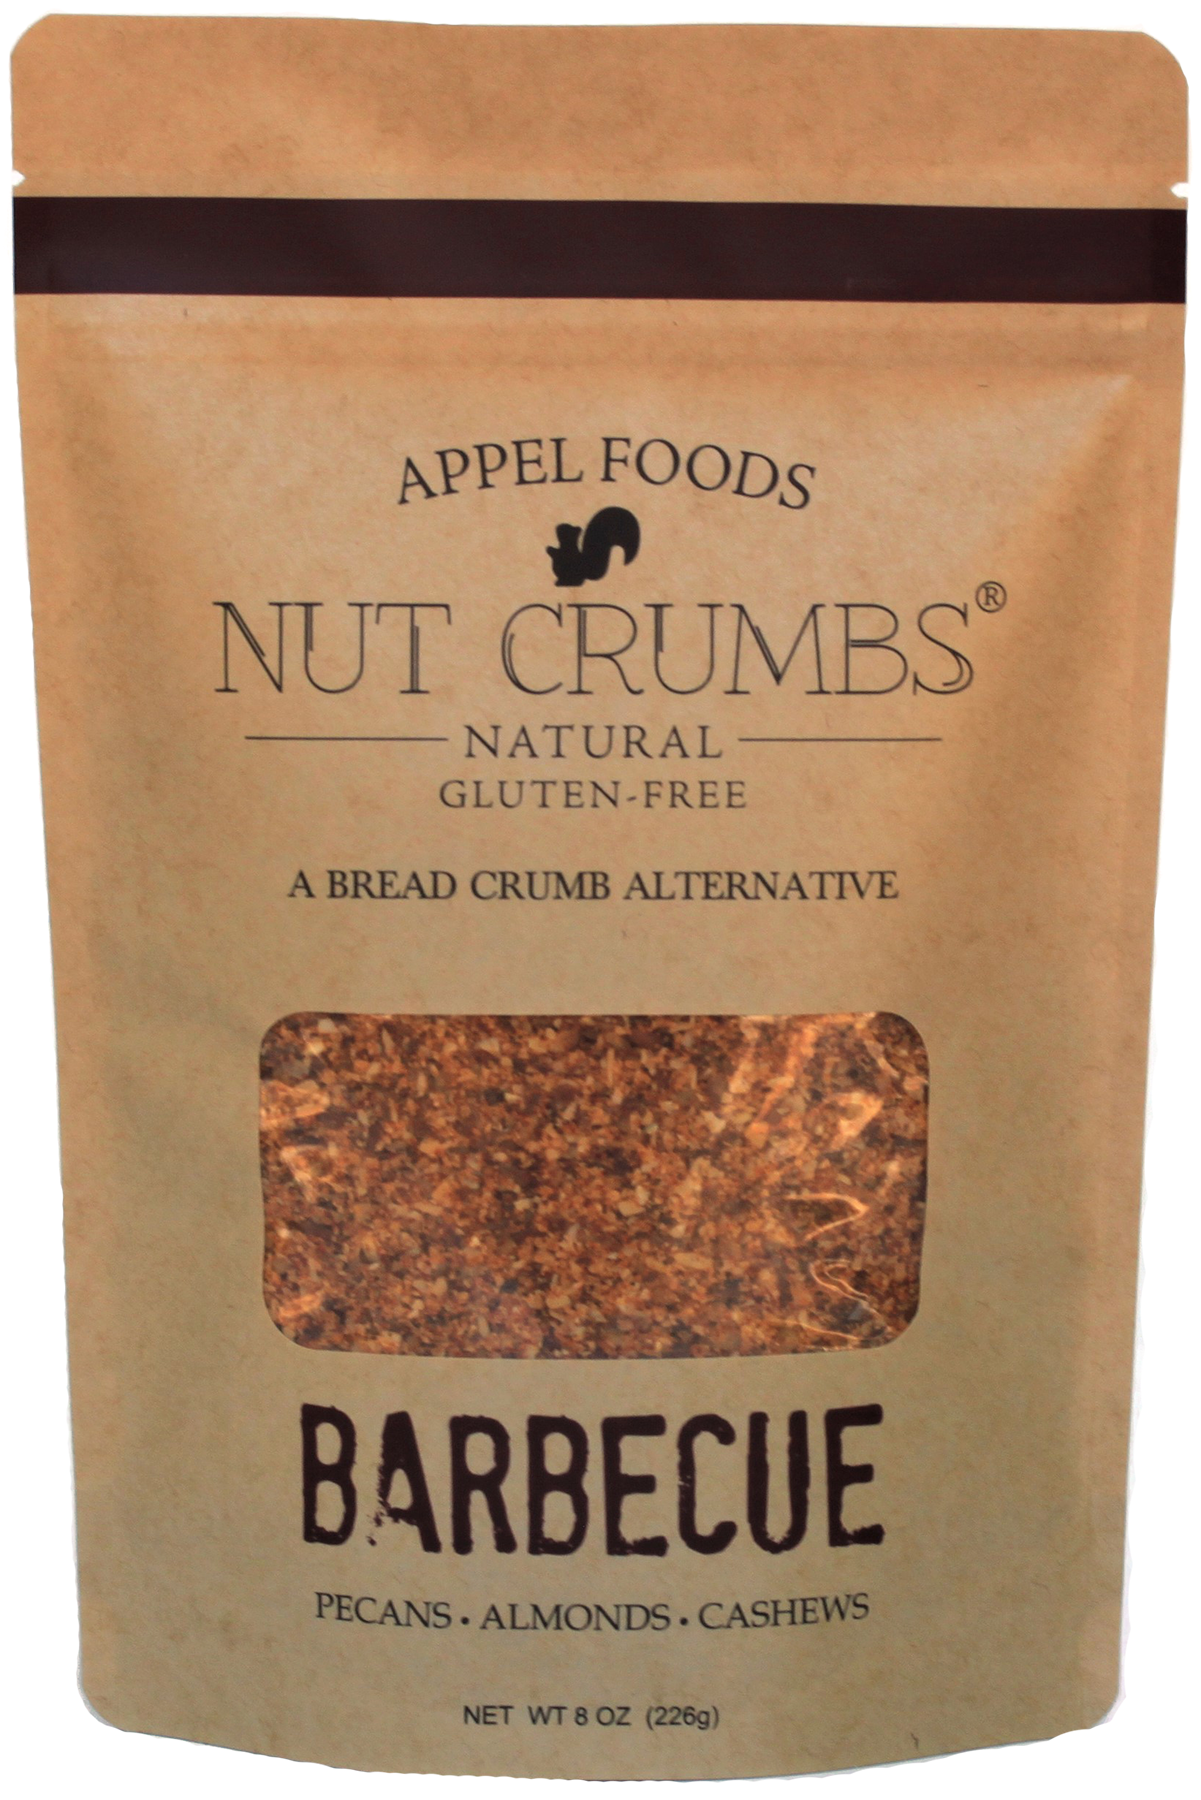 Barbecue Nut Crumbs